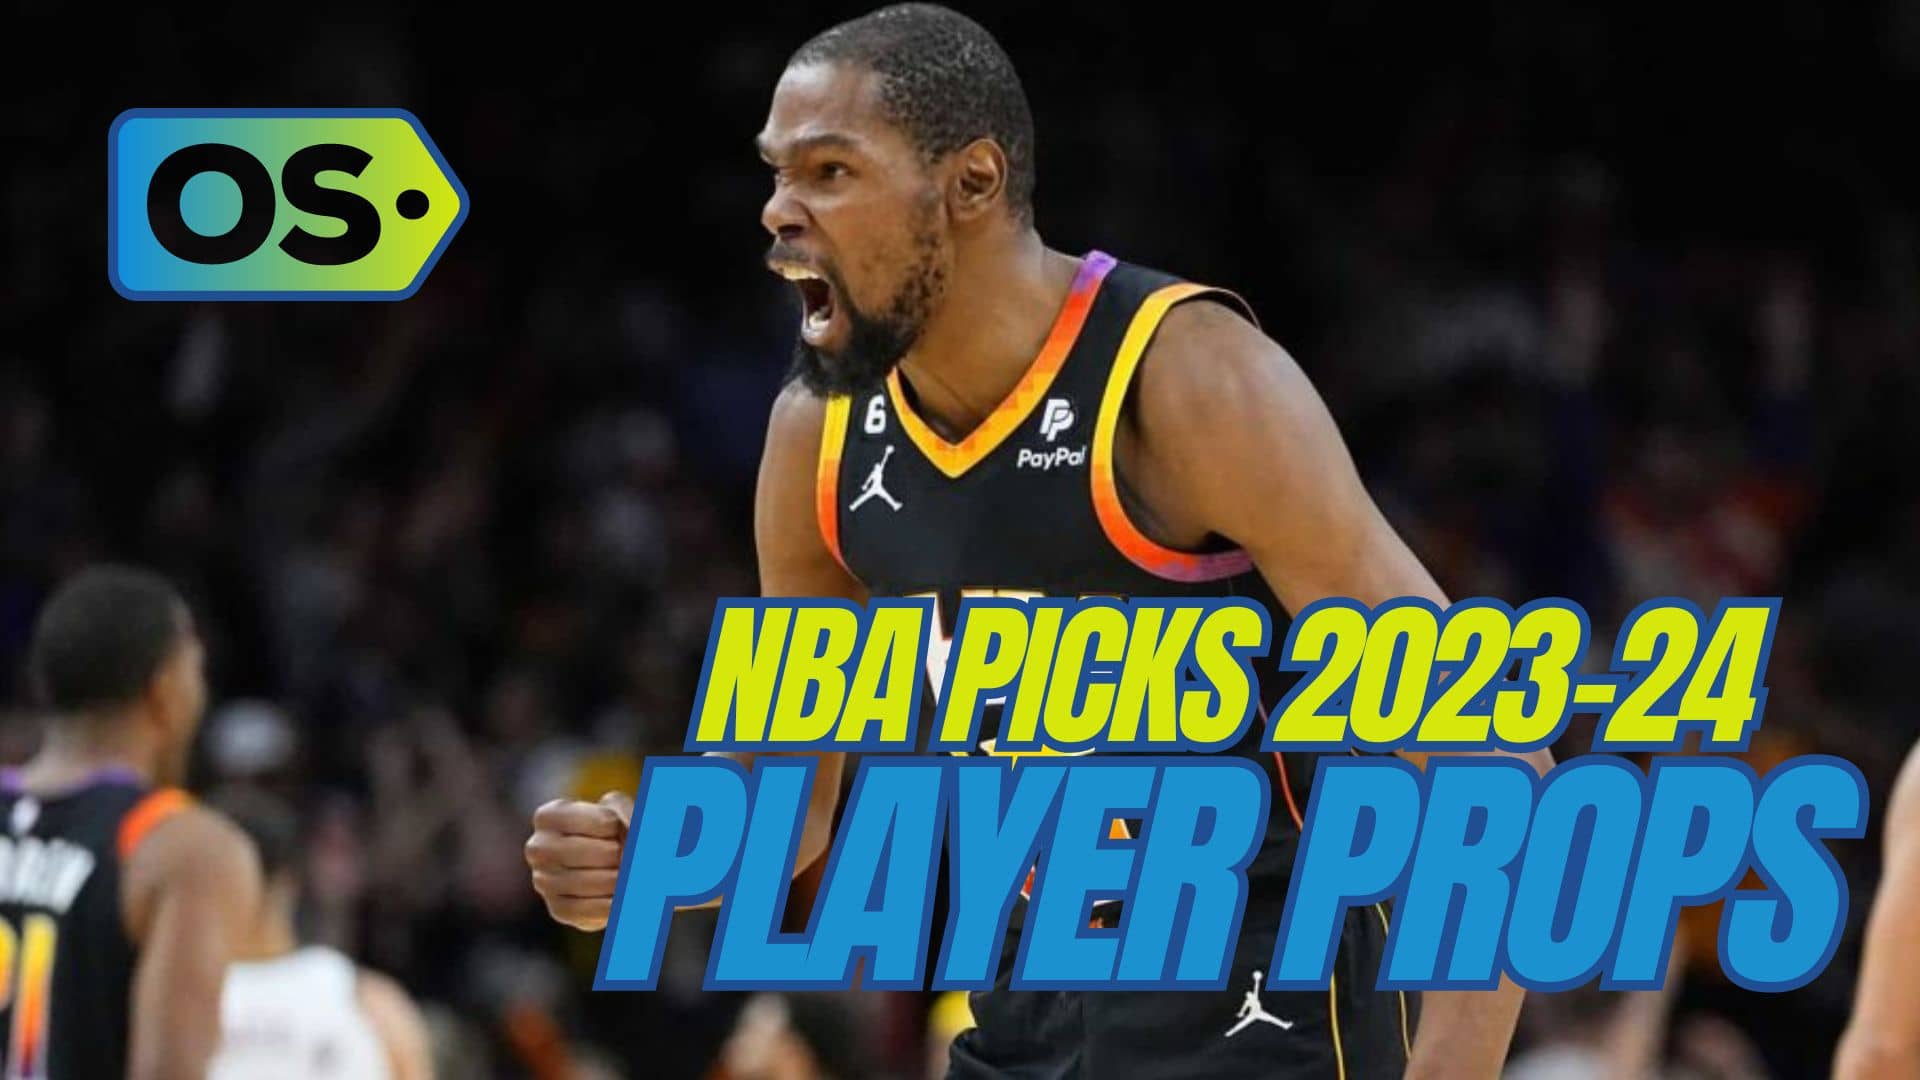 The best NBA player prop bets and picks today for Tuesday, December 19, include wagers on Kevin Durant and Klay Thompson.